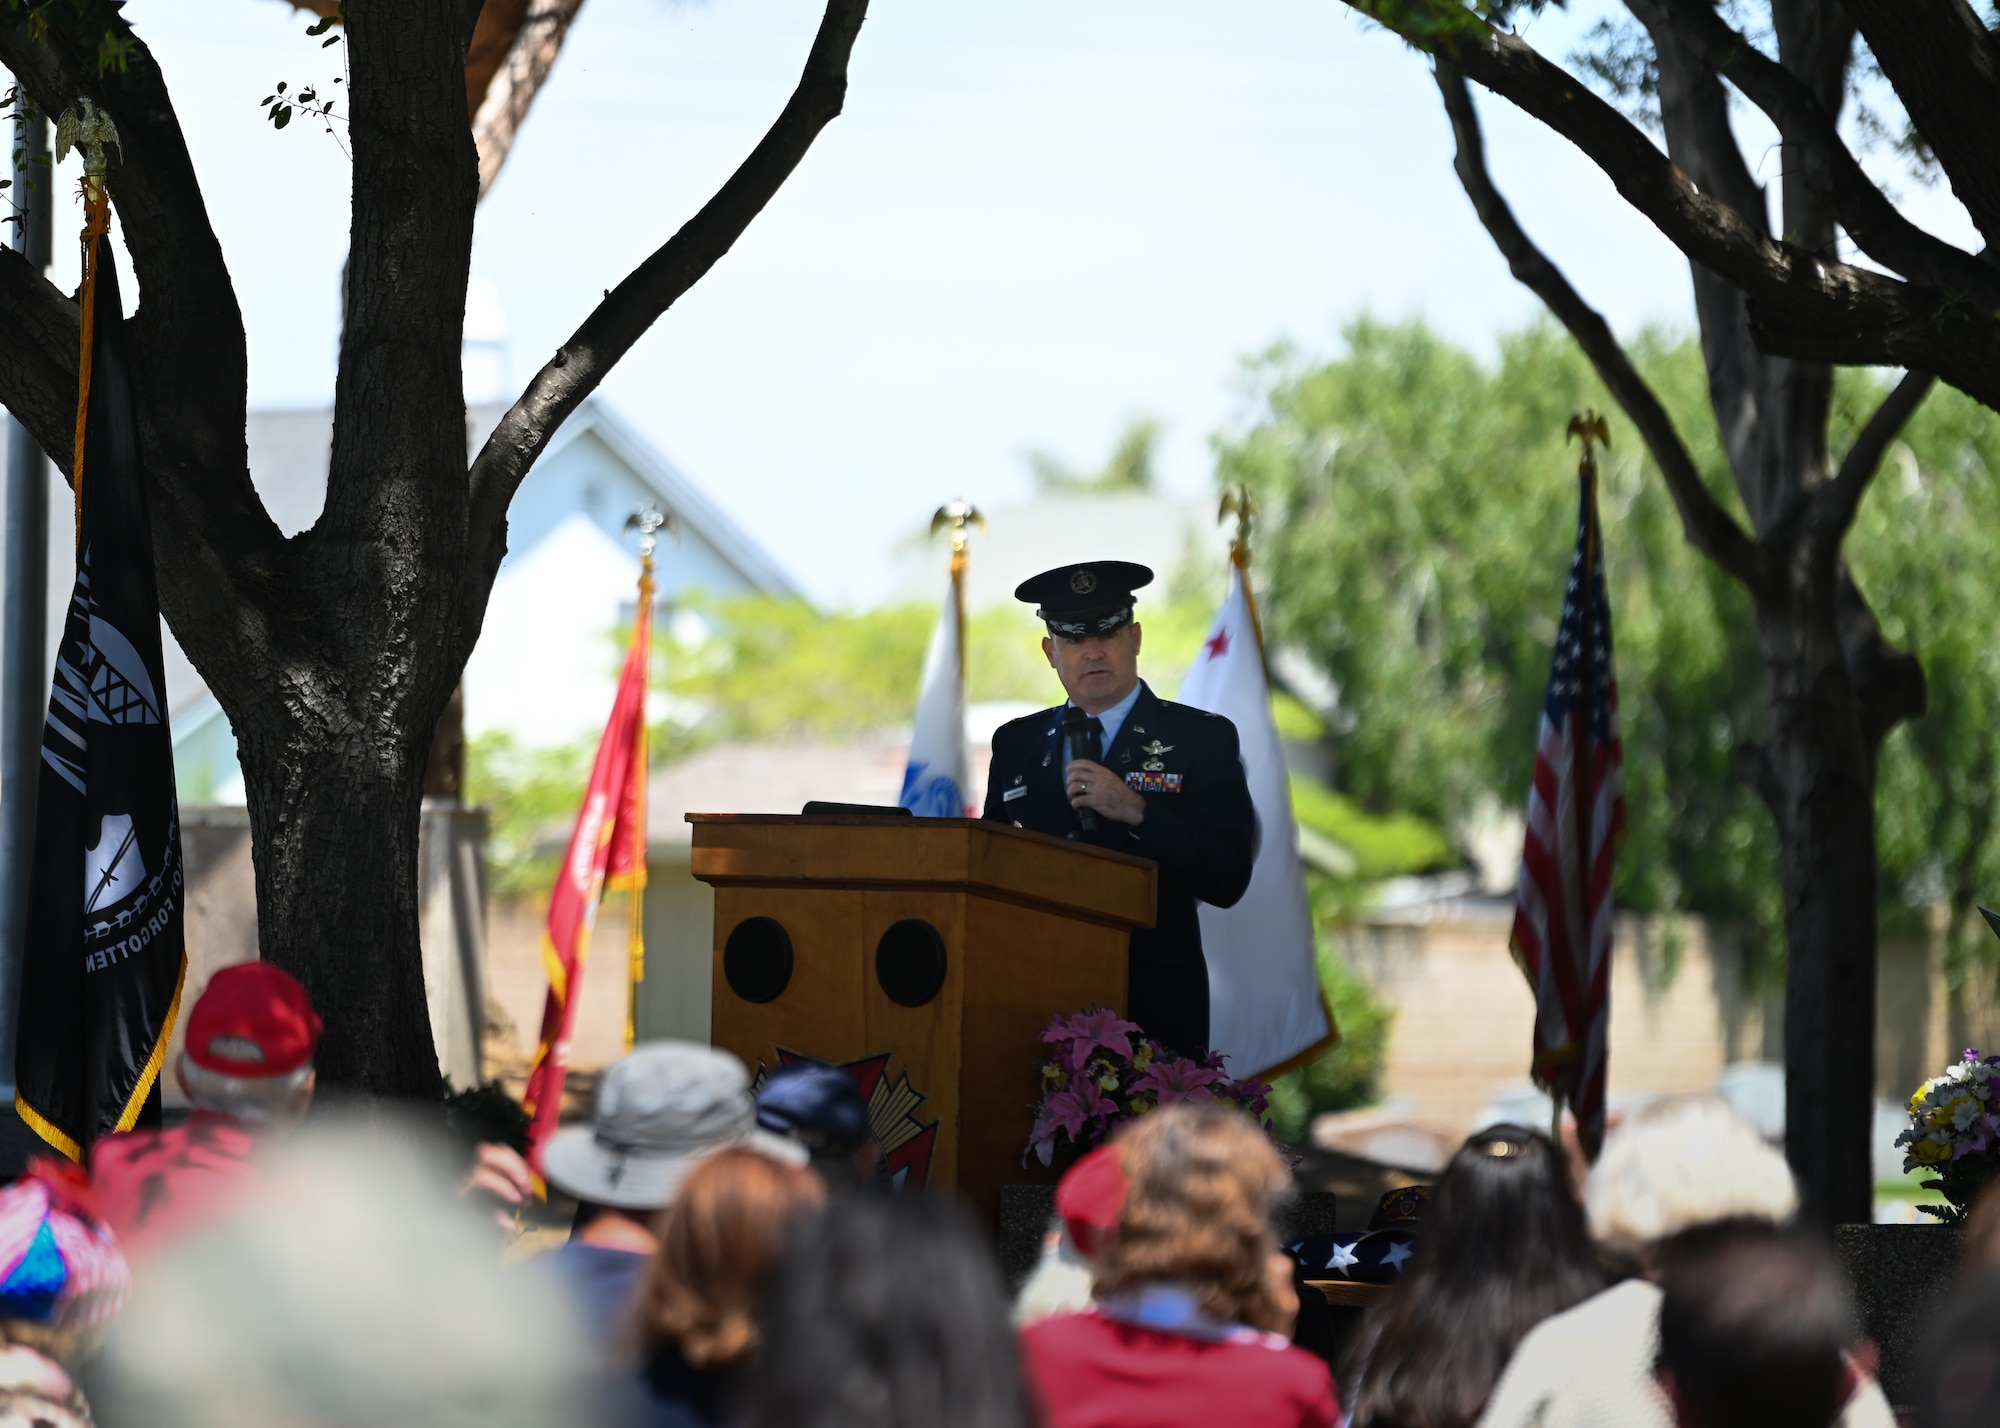 A man in uniform speaks during a ceremony.